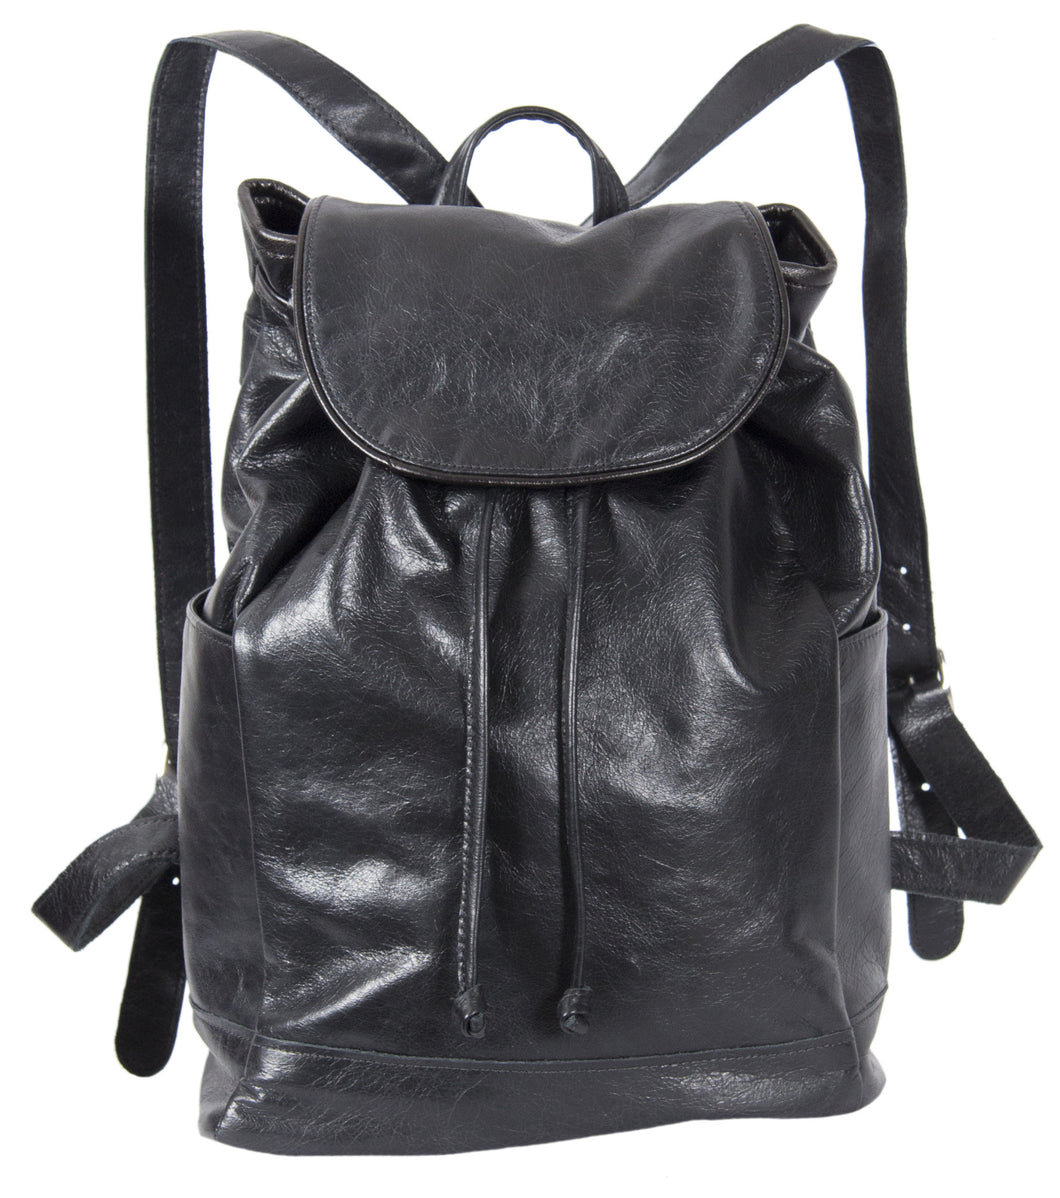 L1039-13 Backpack in an Authentic Old World Black Leather. Part of The On the Tee Vintage Golf Collection and Cosmetic and Travel, Vintage Canadiana, and Totes Collections 10